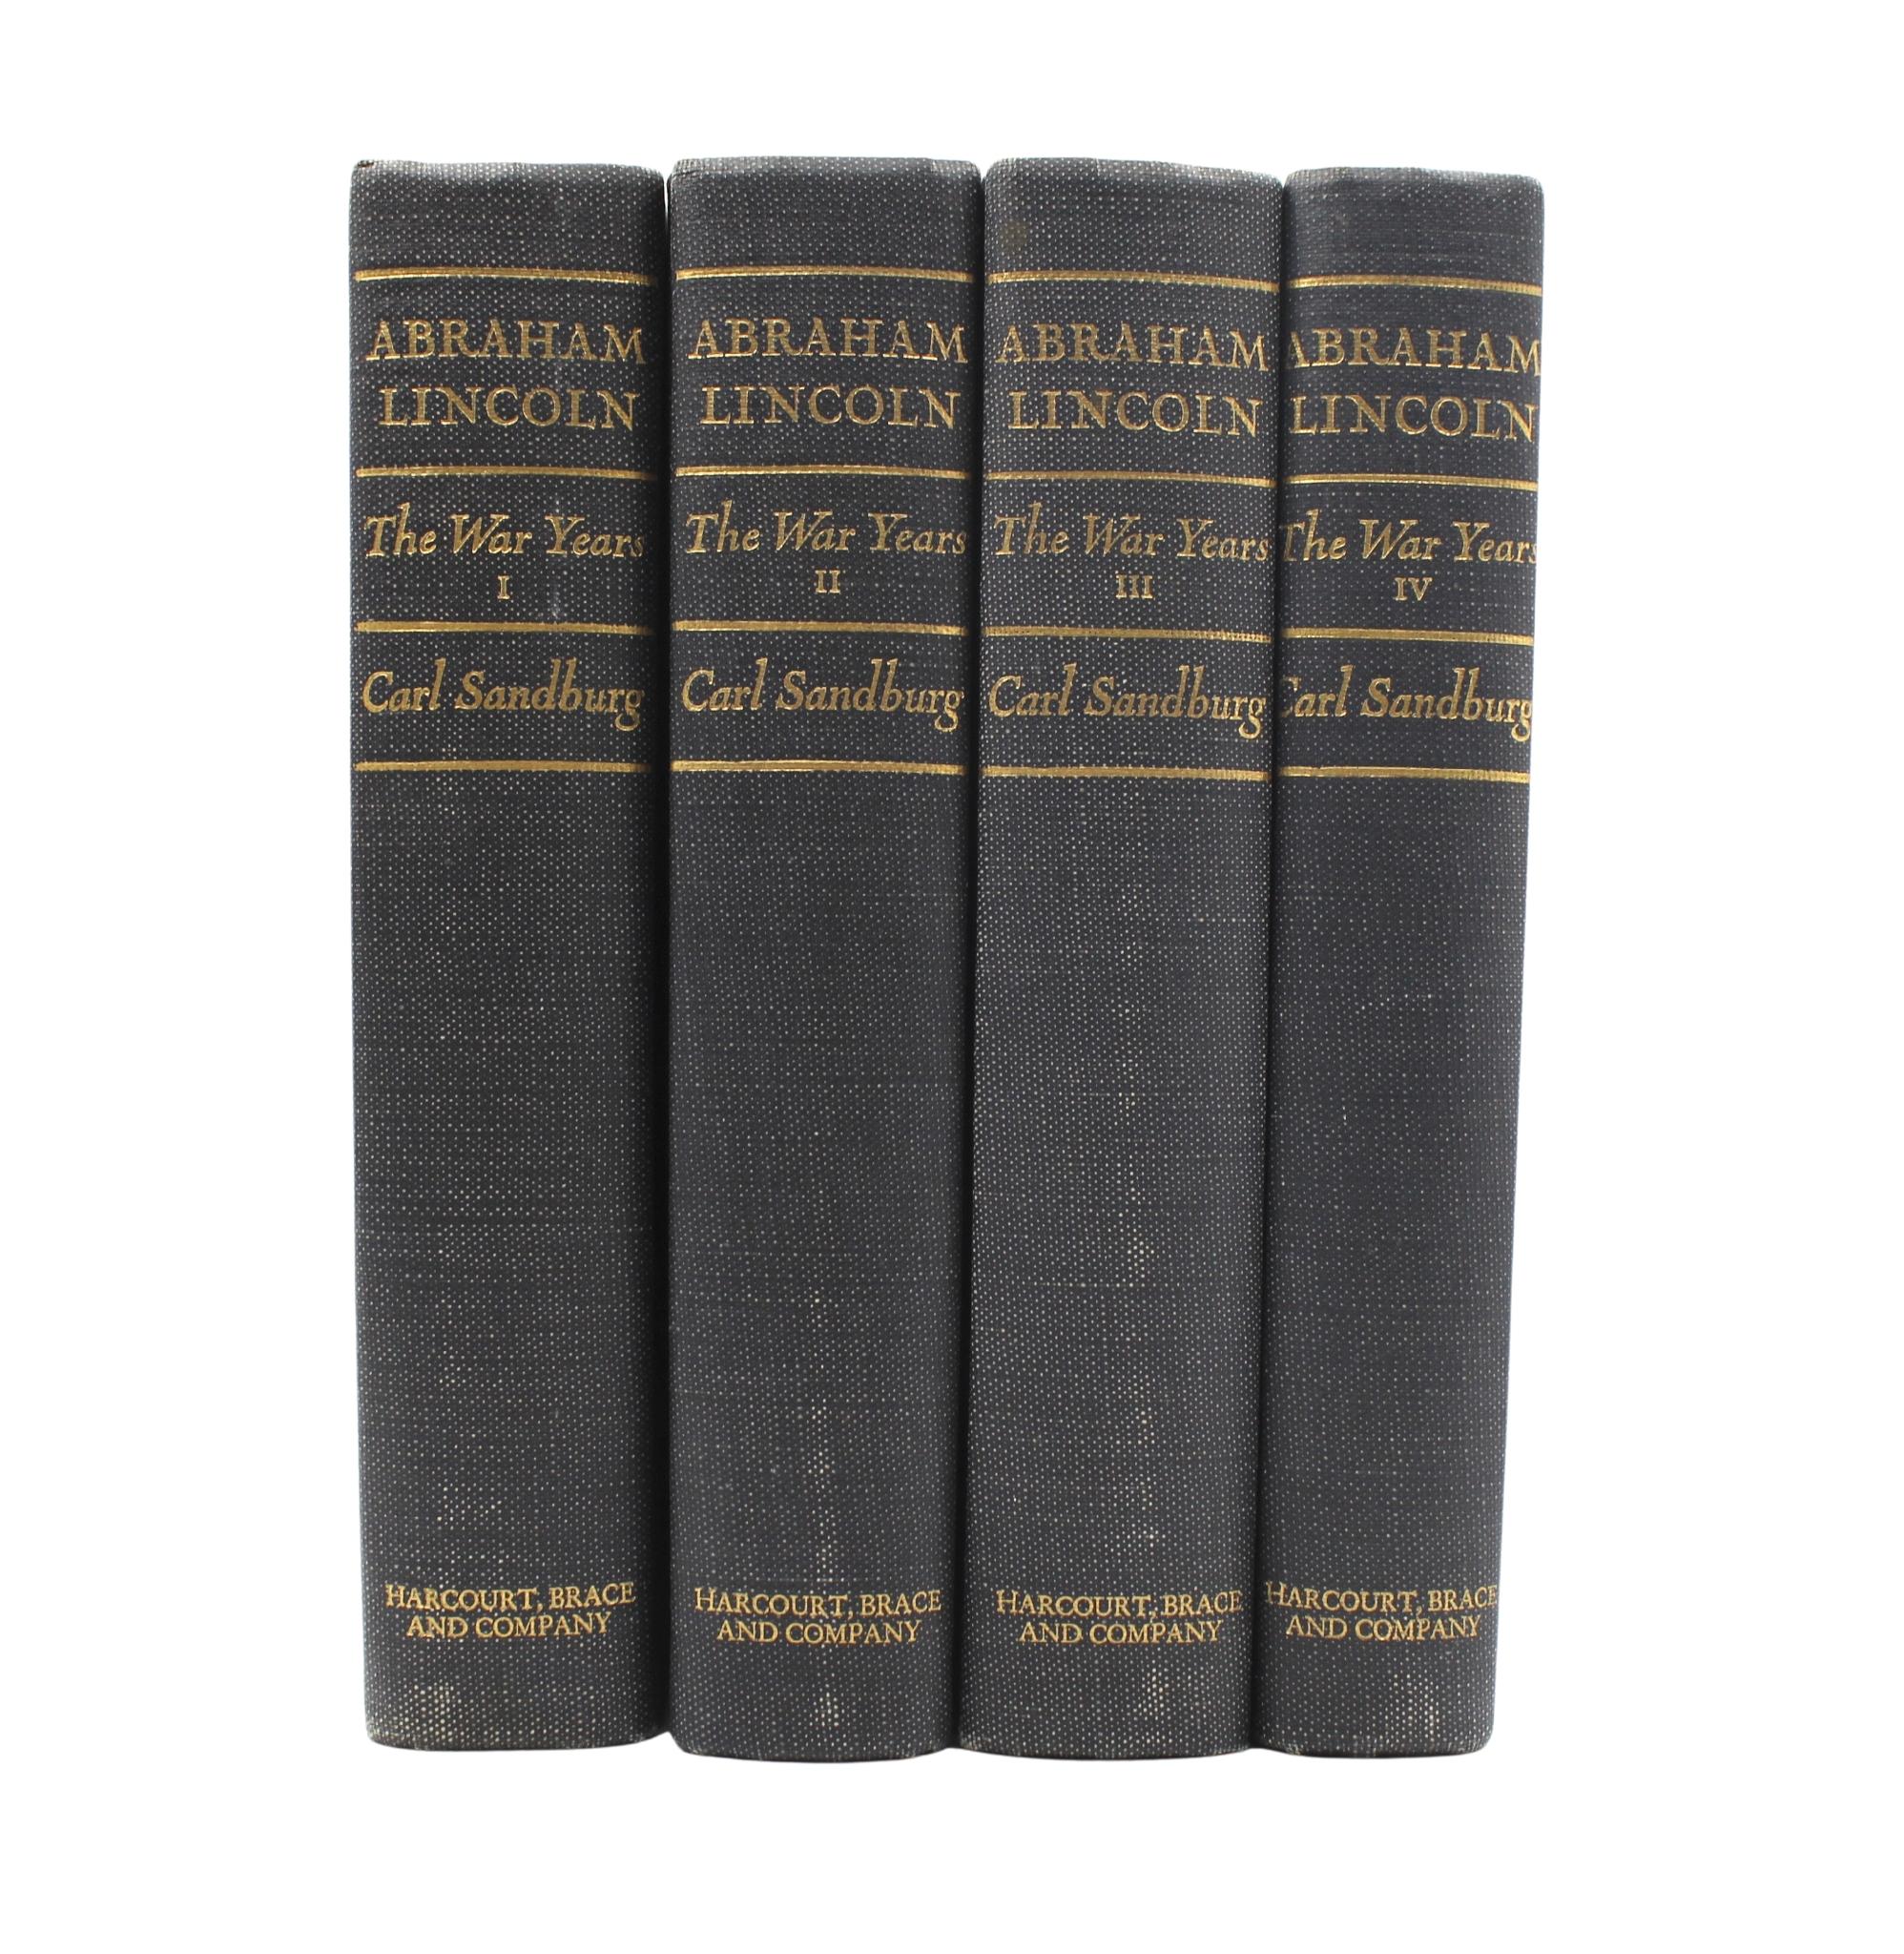 Sandburg, Carl (1878-1967). Abraham Lincoln: The War Years. New York: Harcourt, Brace & Company, 1939. 4 volumes, 8vo. Illustrated. Original publisher's blue cloth with gilt titles to spines. 

This is the first trade edition of Carl Sandburg's